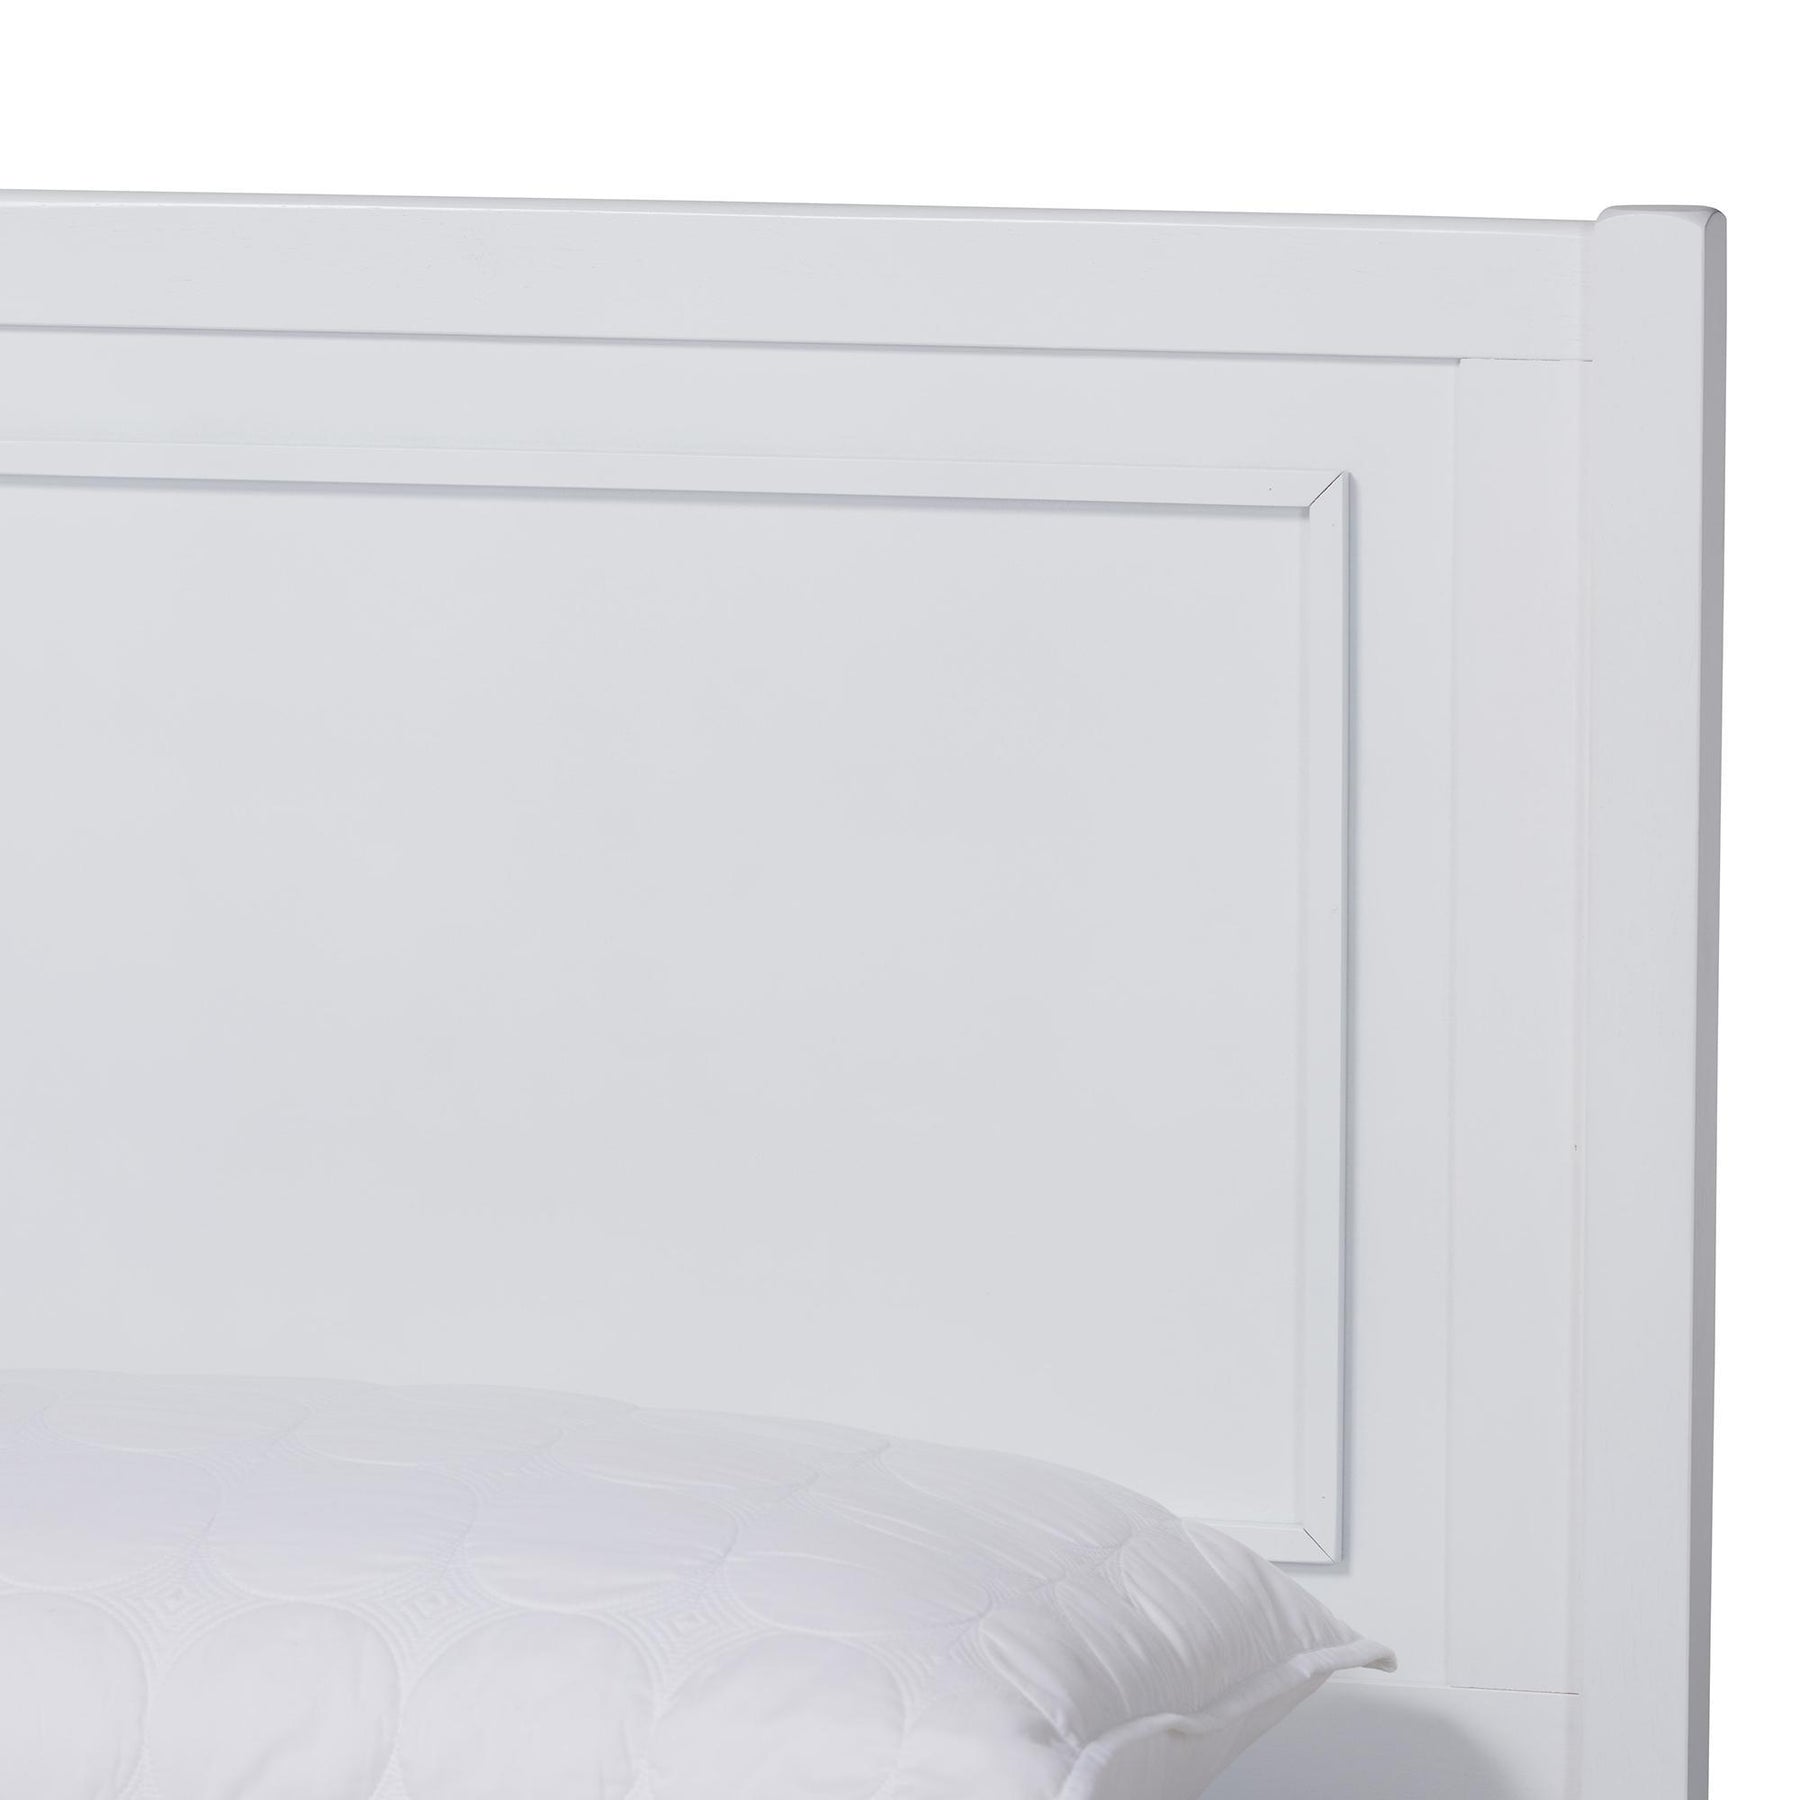 Baxton Studio Daniella Modern And Contemporary White Finished Wood Full Size Platform Bed - MG0076-White-Full Bed